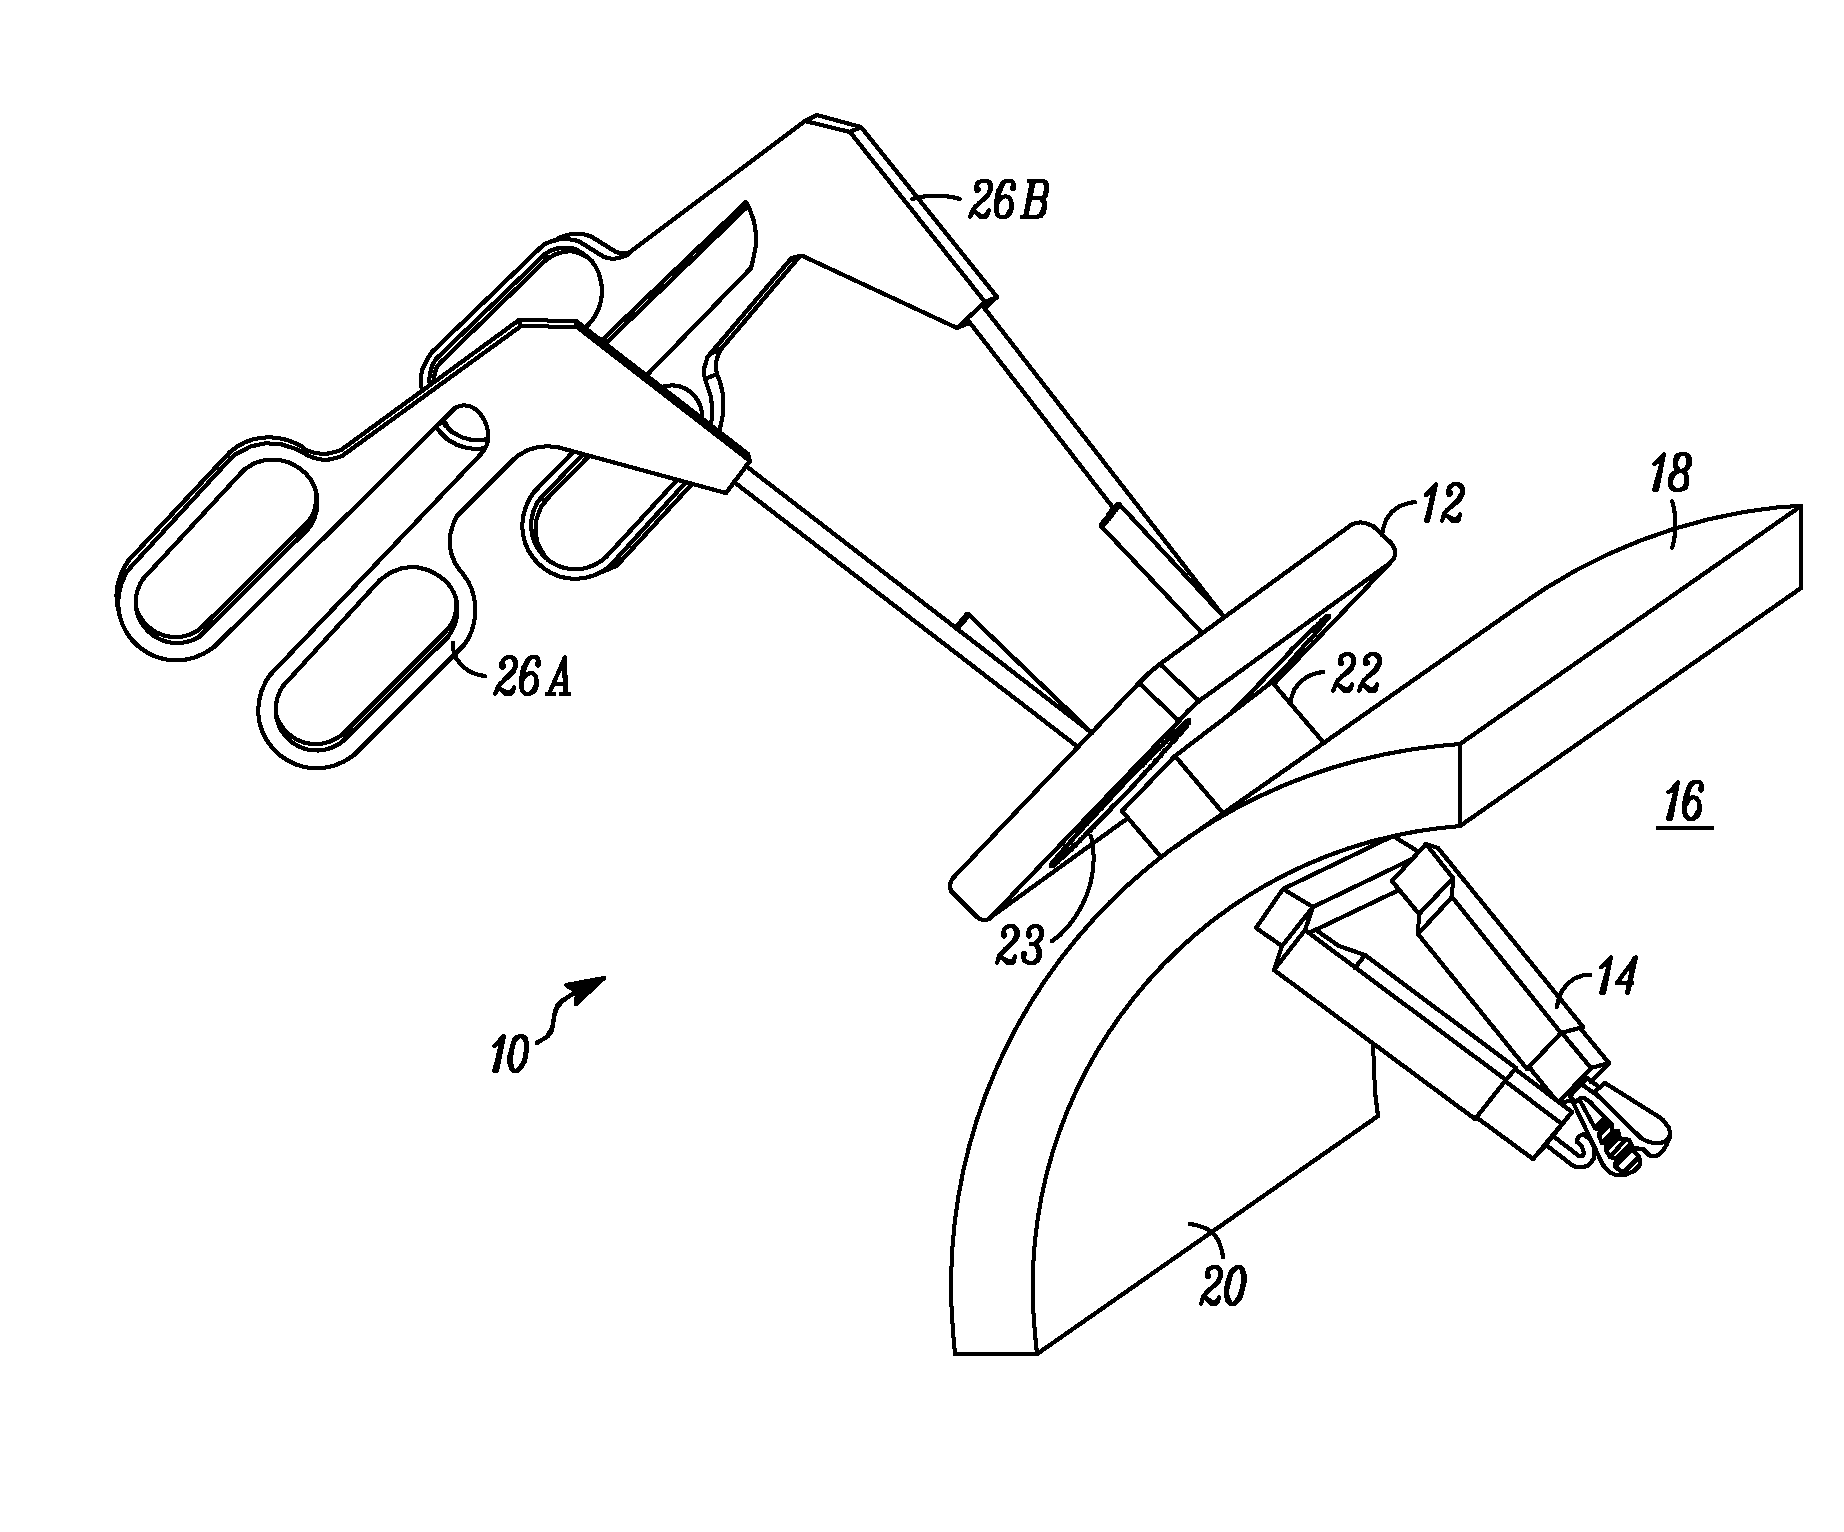 Methods, systems, and devices for surgical visualization and device manipulation